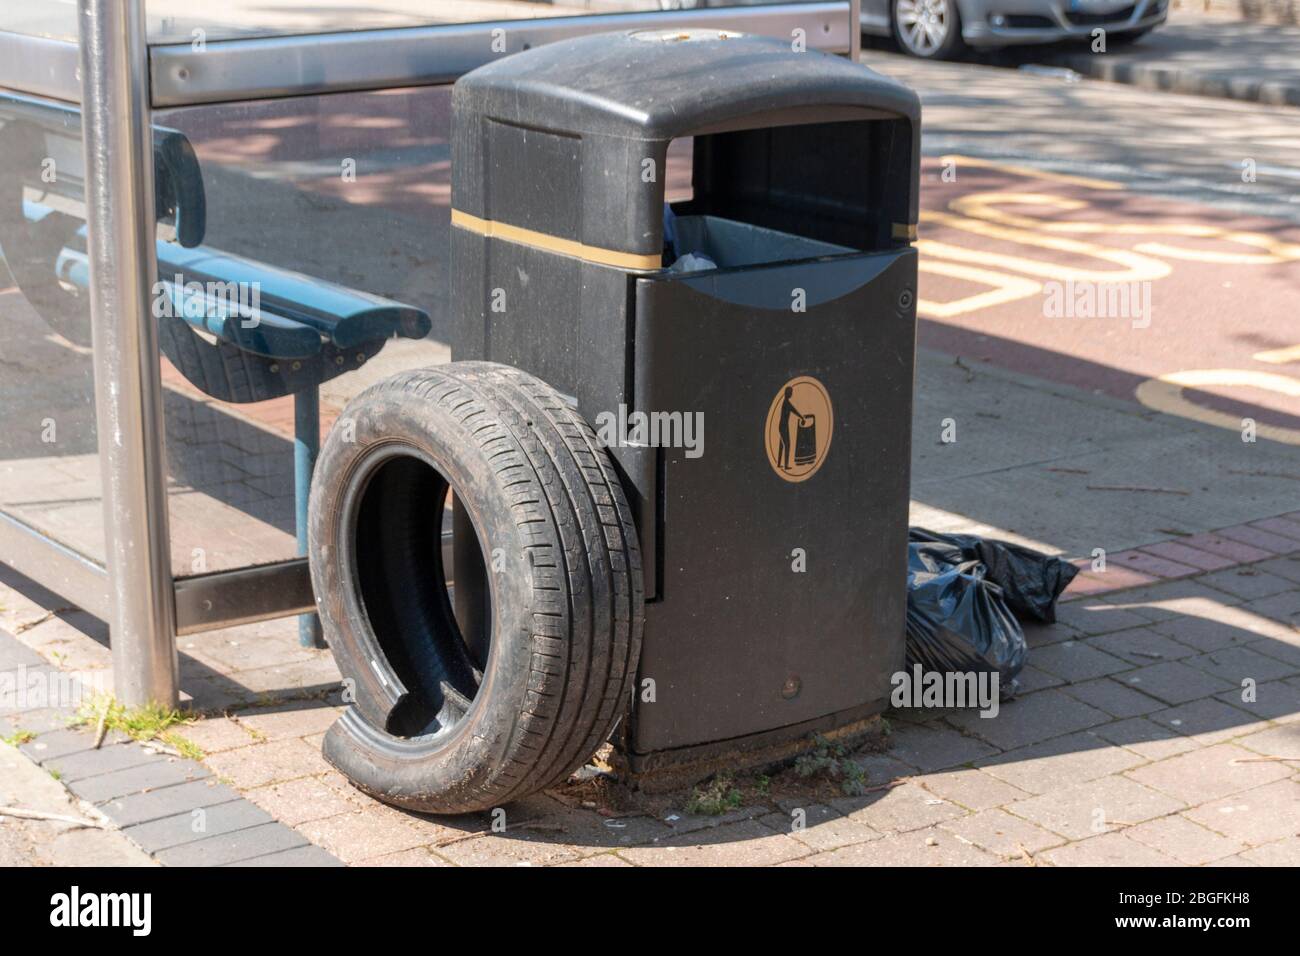 a close up view of a car tyre and black bags that have been left next to a public rubbish bin Stock Photo